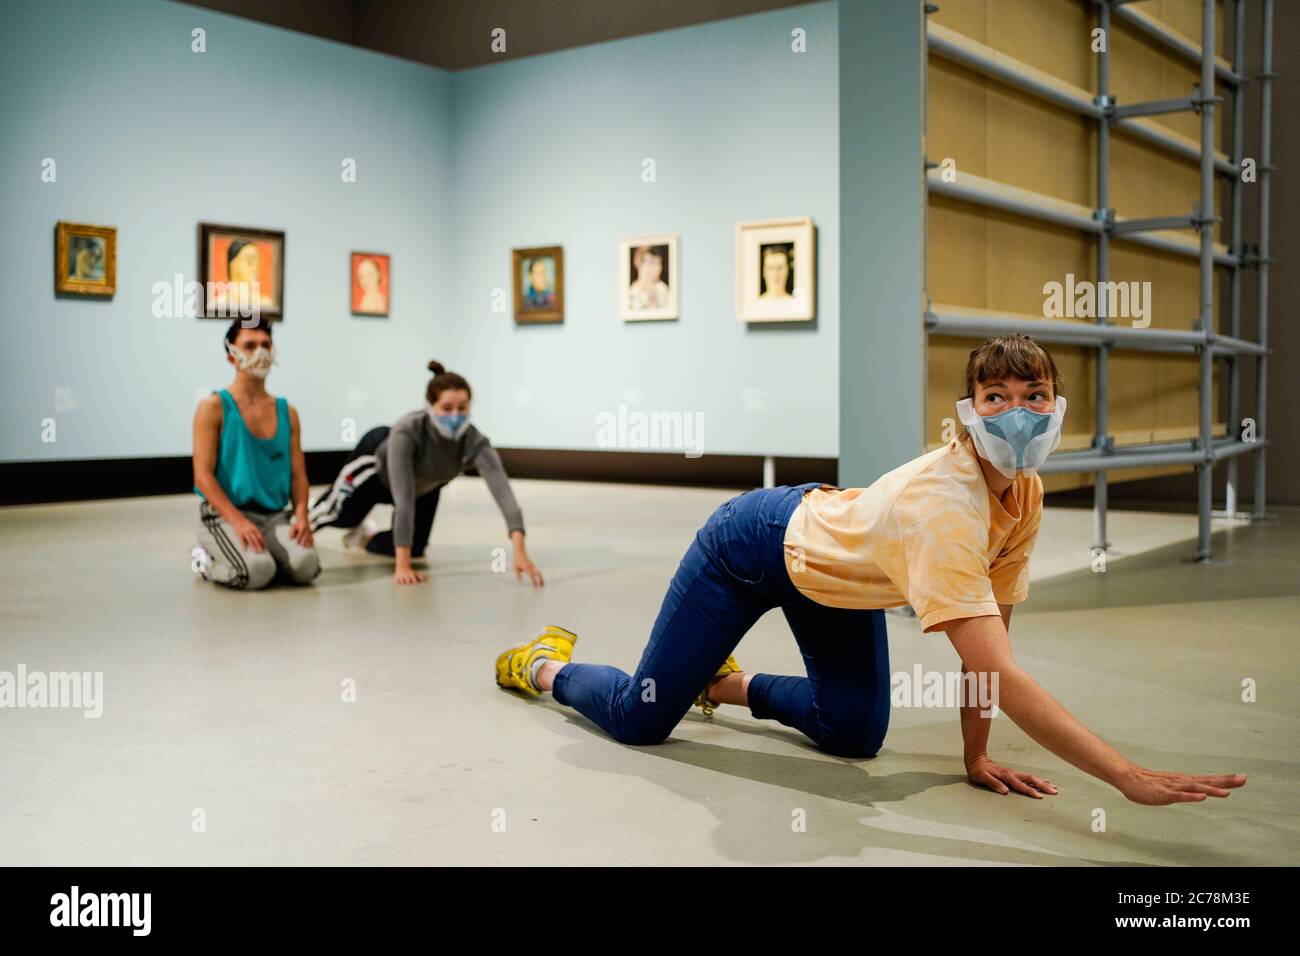 Mannheim, Germany. 15th July, 2020. In the special exhibition 'Umbruch' at the Kunsthalle Mannheim, so-called performers show a dance intervention by the artist Alexandra Pirici entitled 'Re-Collection' in front of works by the artist Jeanne Mammen. Credit: Uwe Anspach/dpa/Alamy Live News  Stock Photo